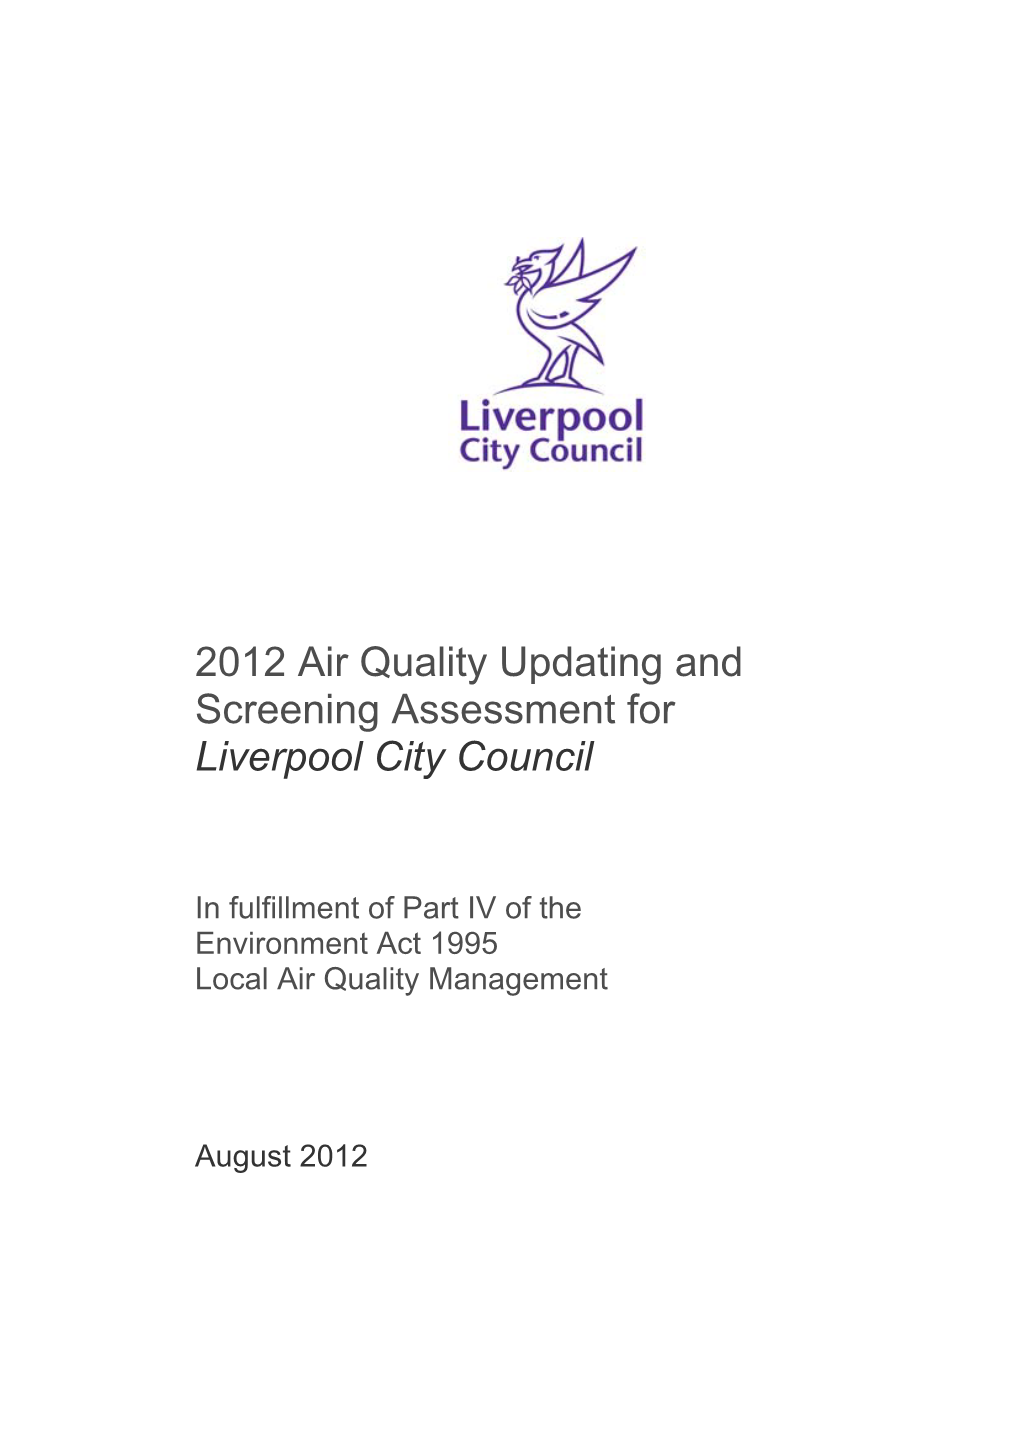 2012 Air Quality Updating and Screening Assessment for Liverpool City Council